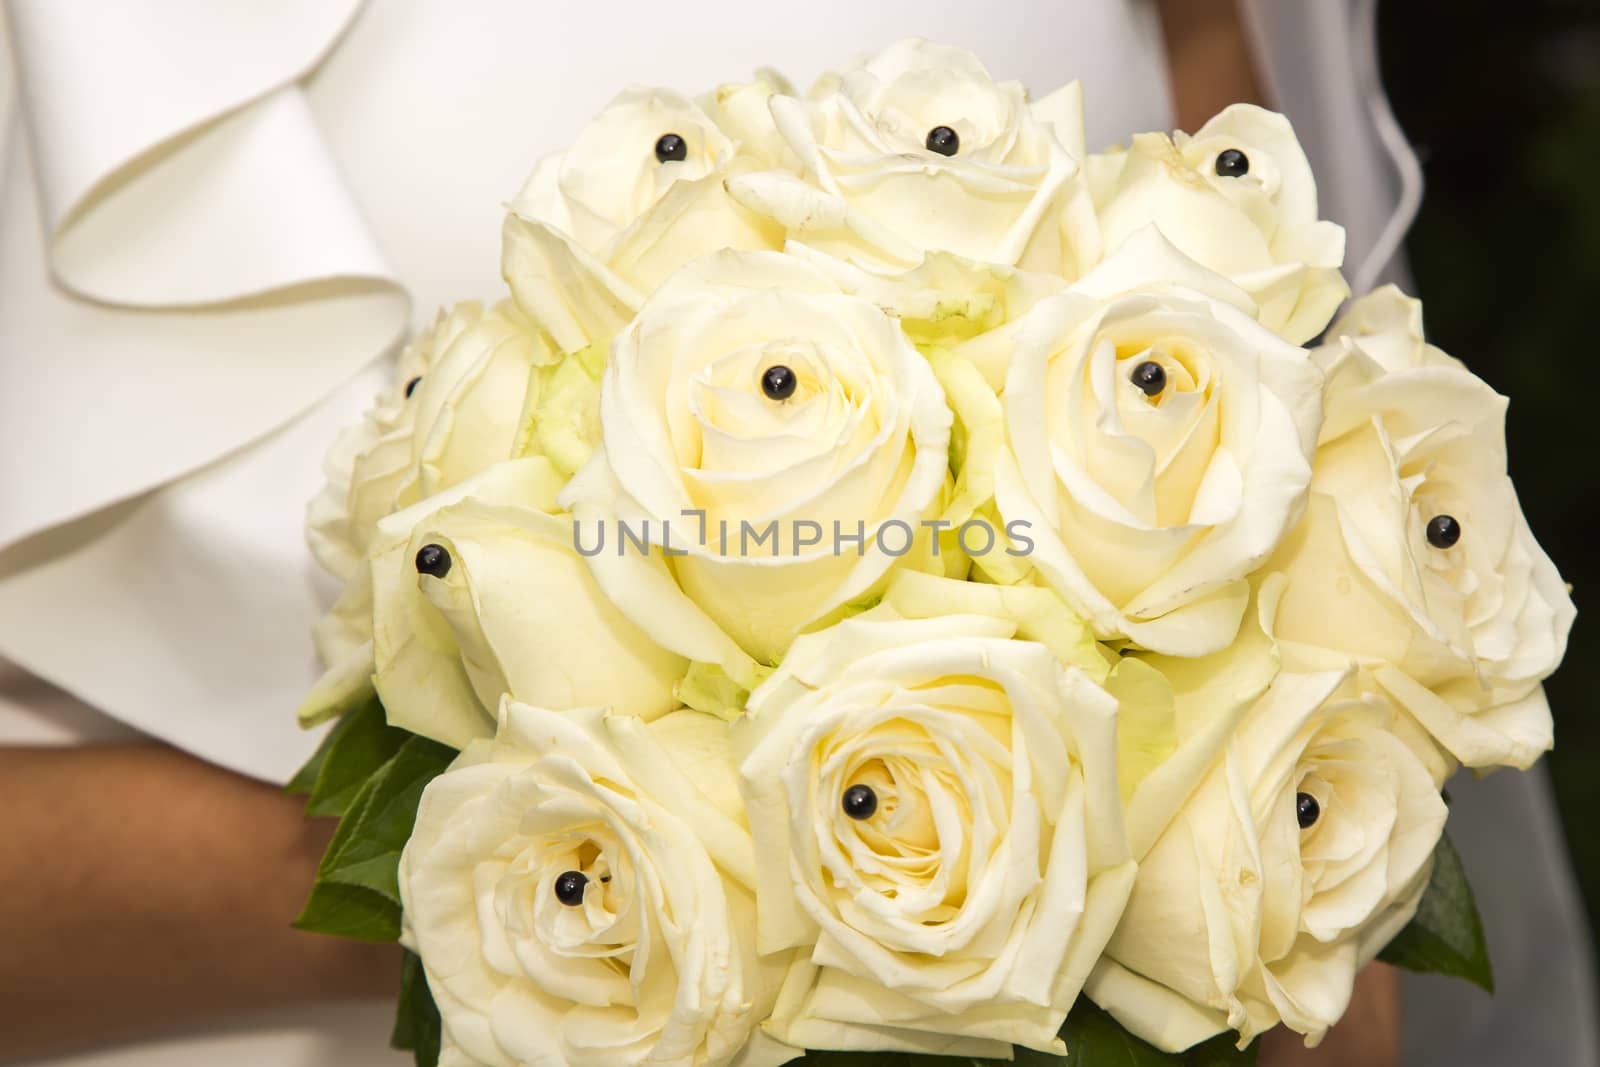 Close-up view of a bridal bouquet made of roses pale yellow